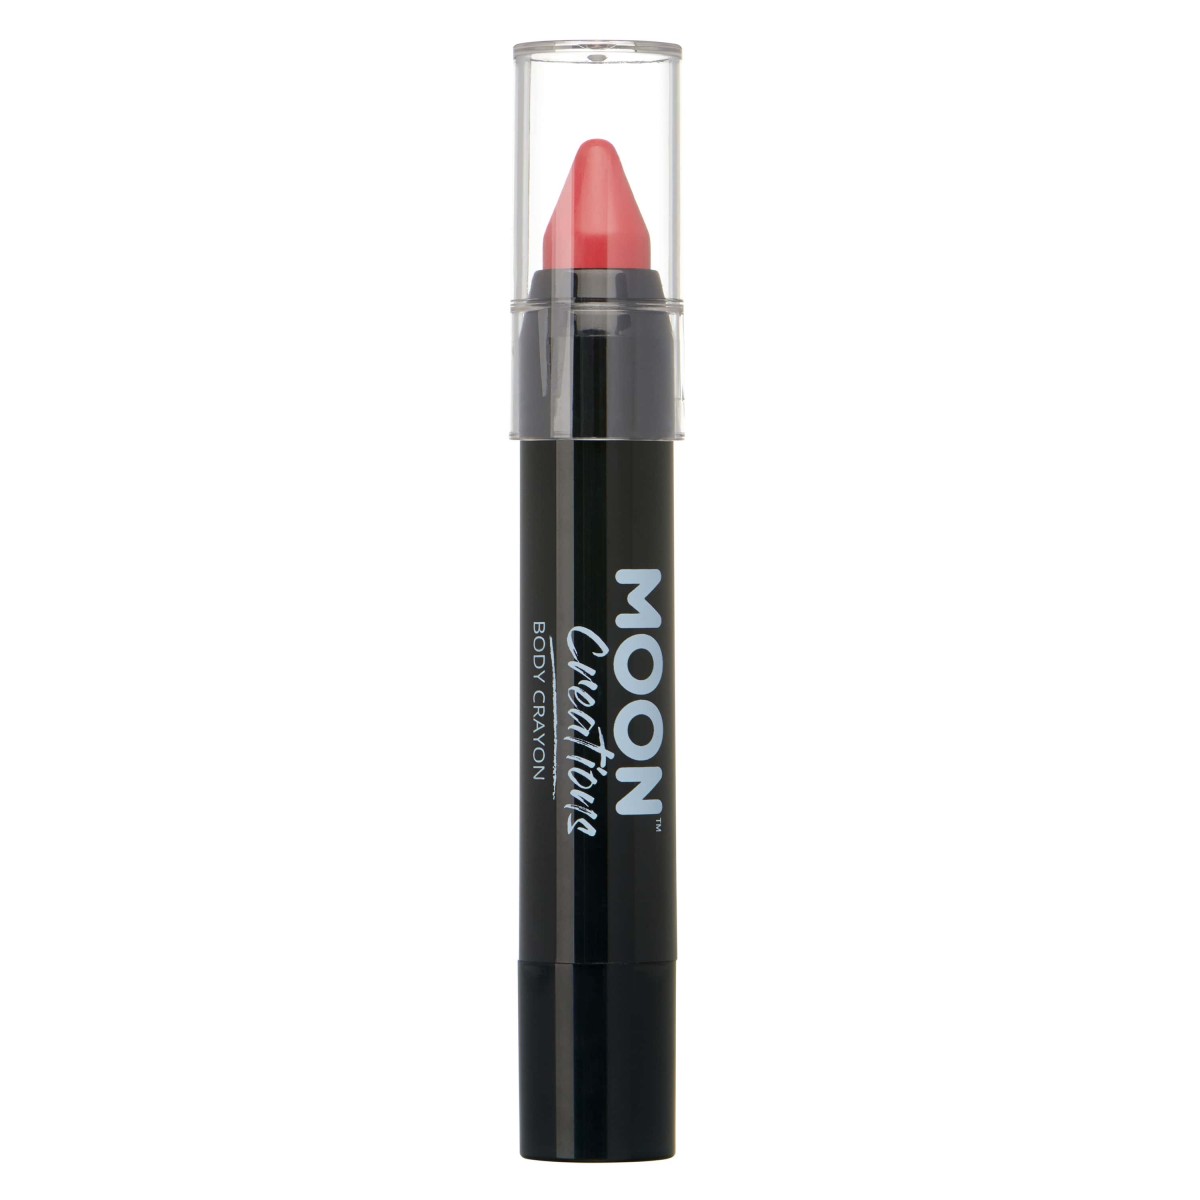 MOON CREATIONS C3 FACE & BODY CRAYON BRIGHT PINK 3.2g